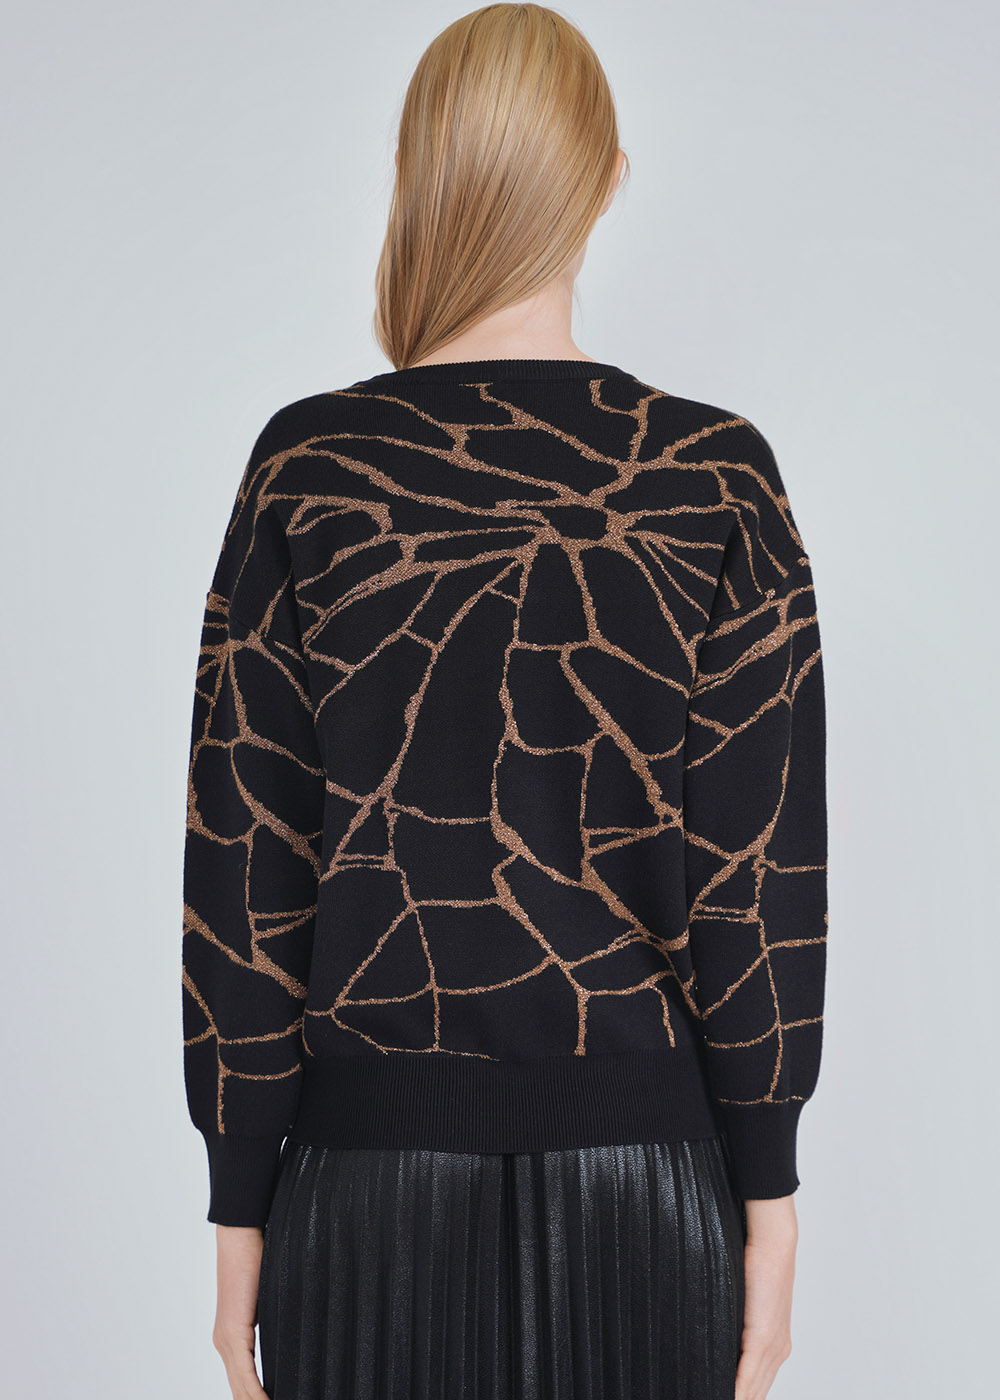 Black Knitwear with Whispered Gold Detail